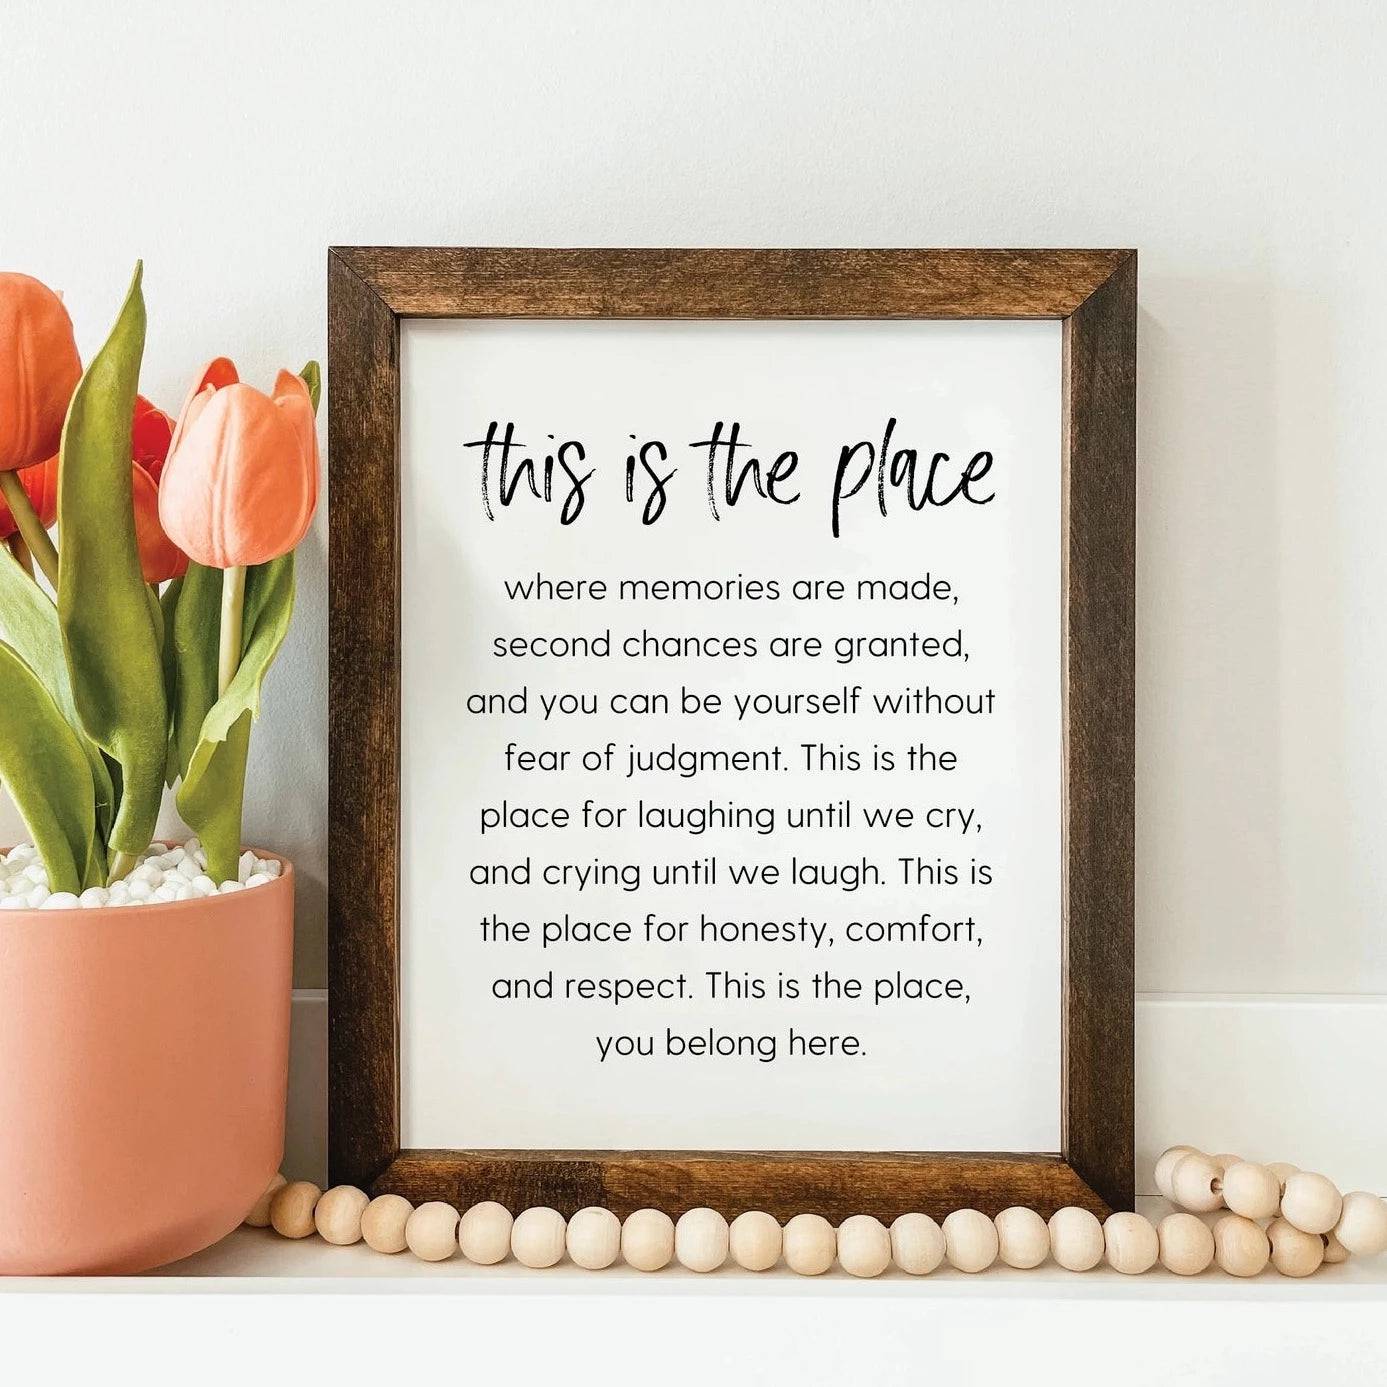 This is the Place | Framed Wood Sign - The Local Space